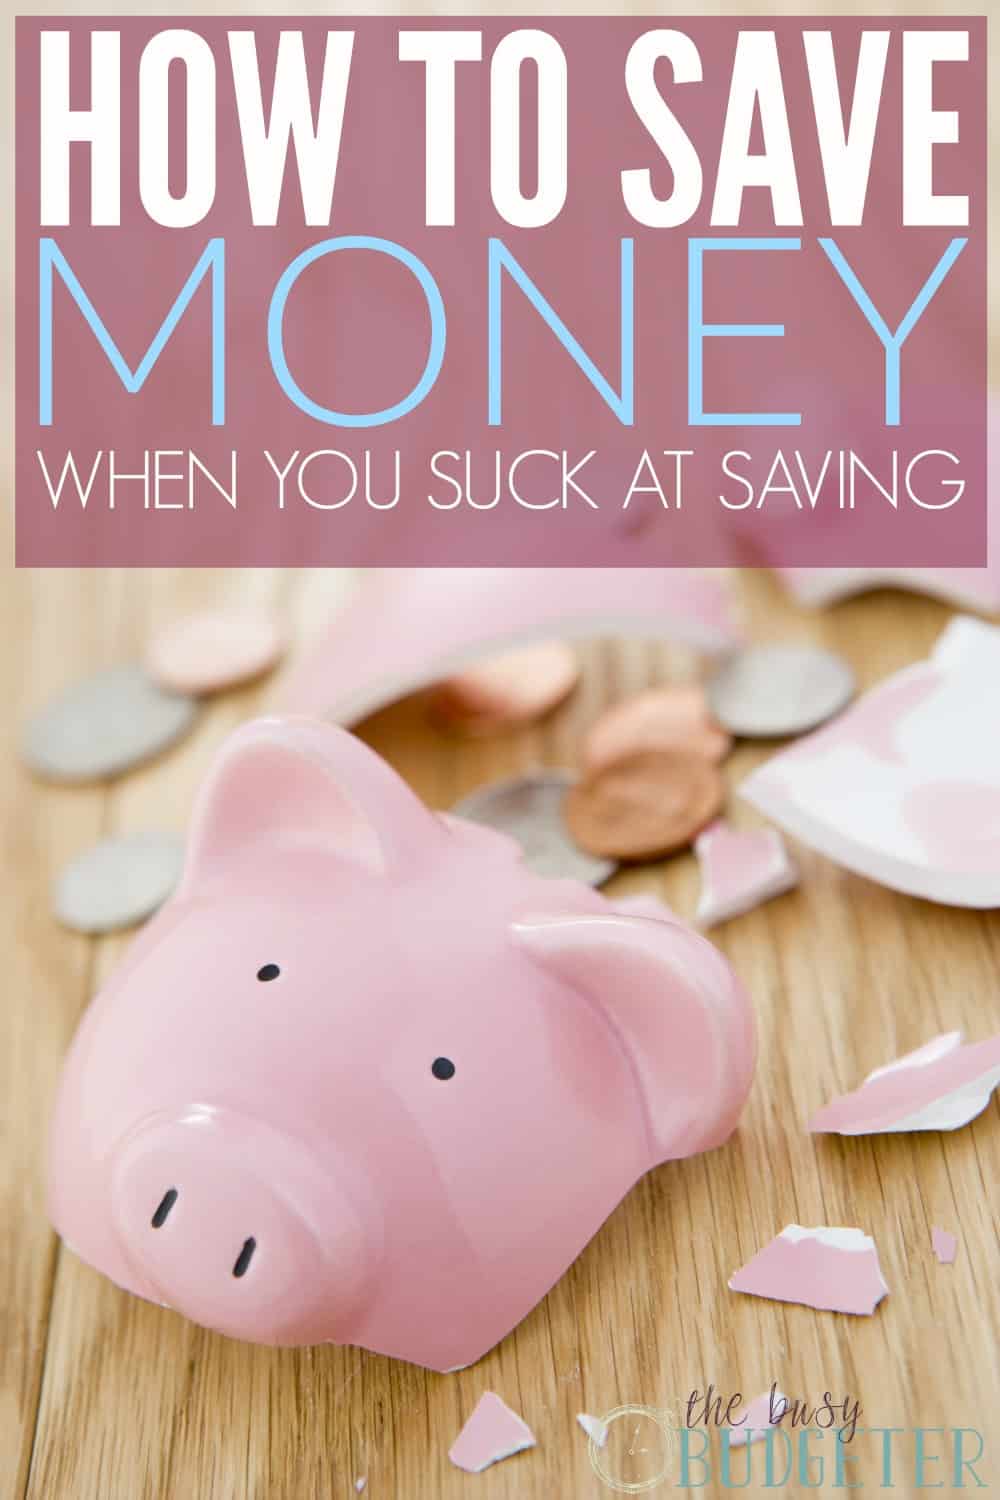 How to save money when you suck at saving